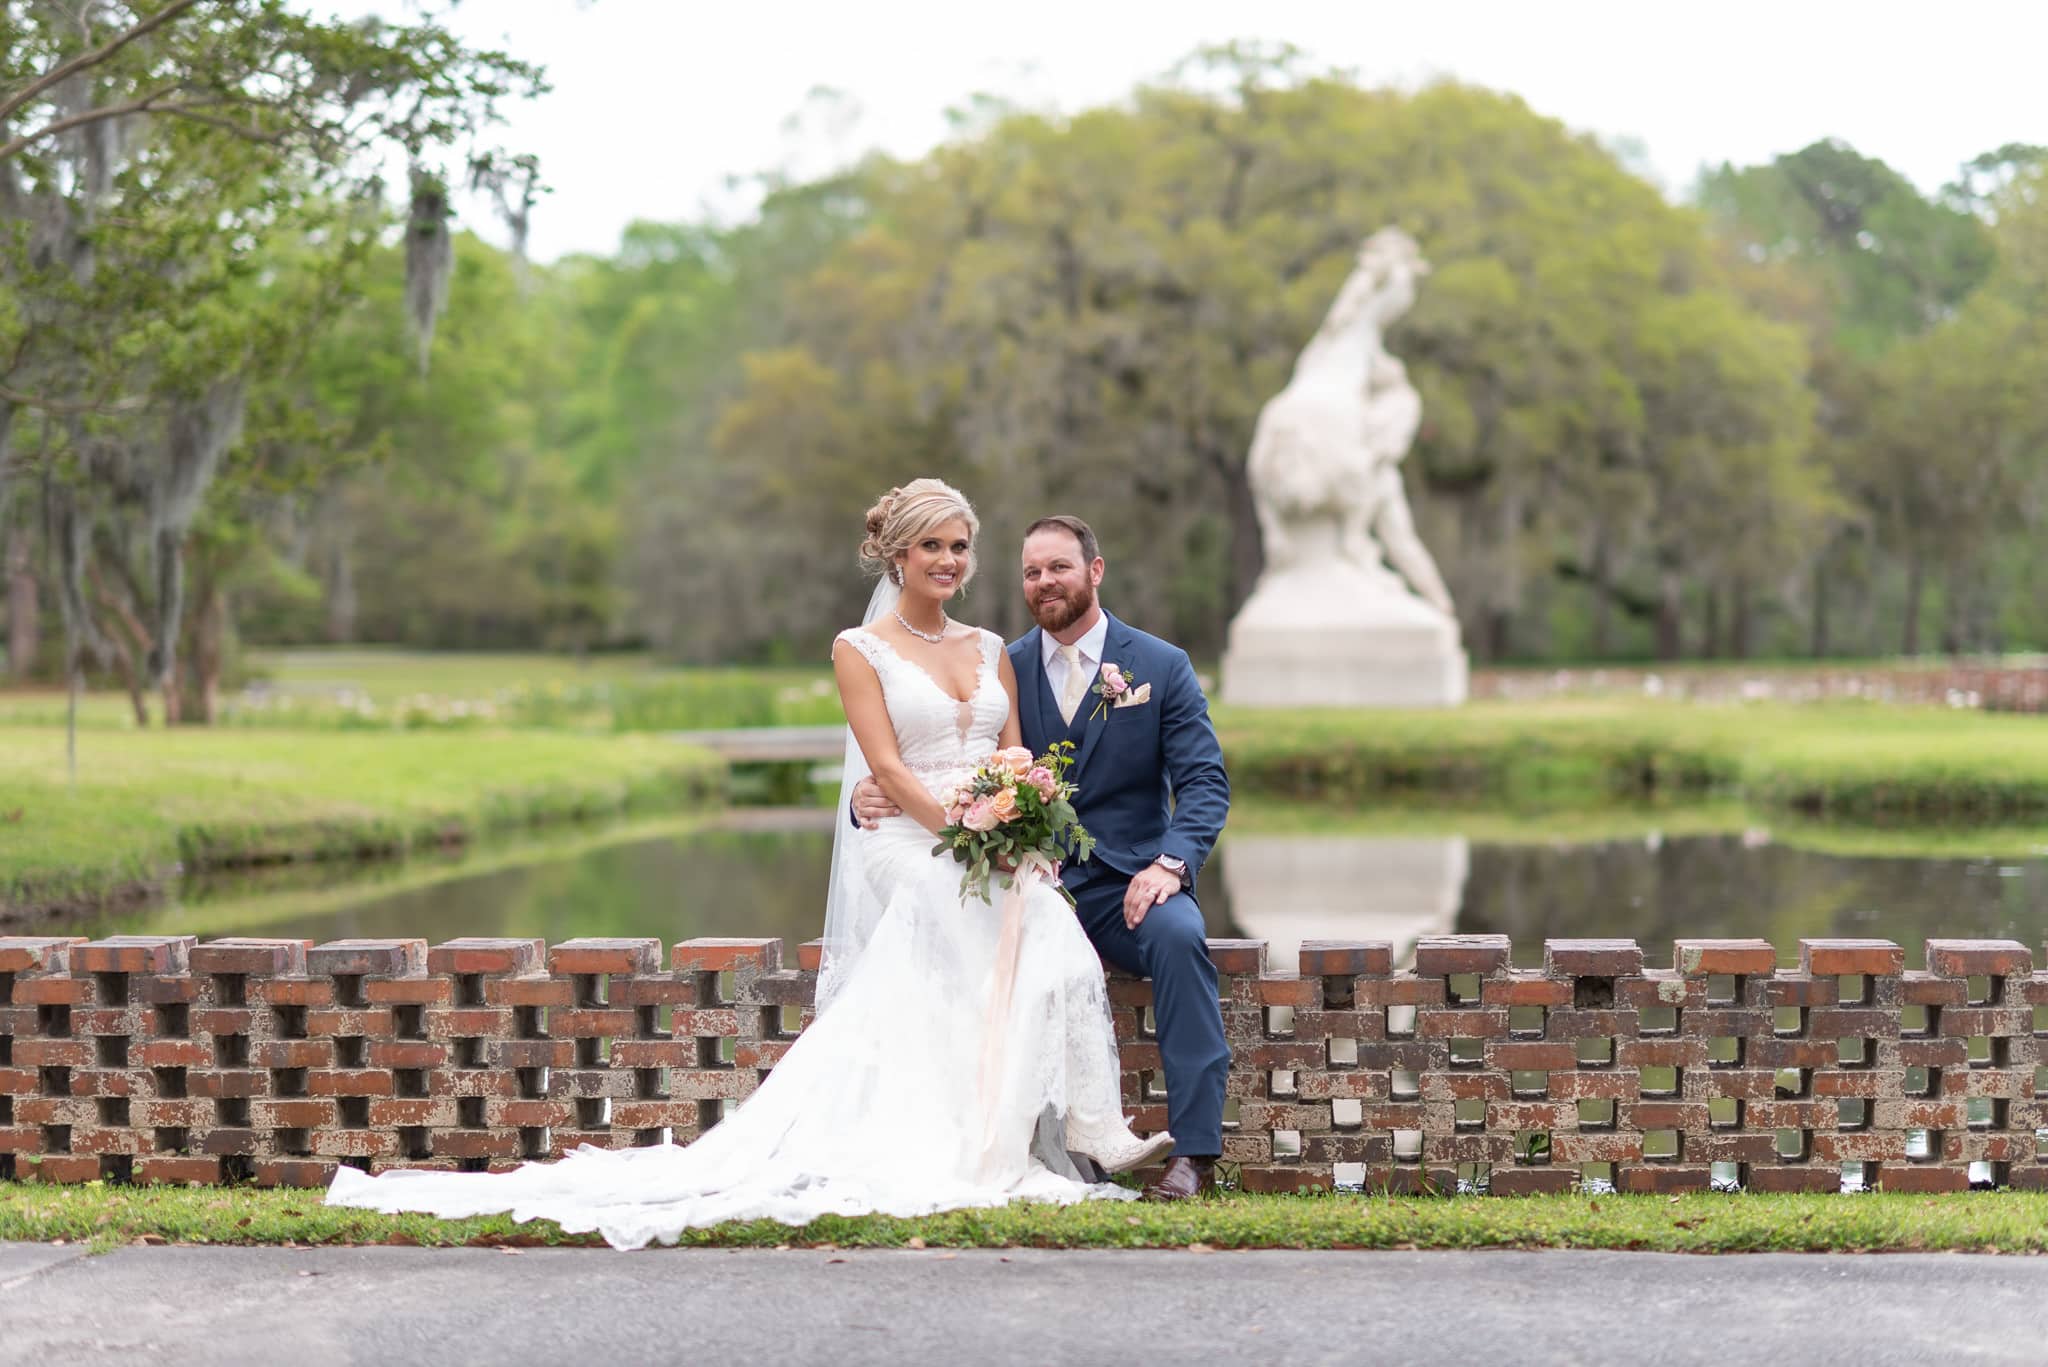 Bride and groom with "Youth Taming the Wild" sculpture in the background - Brookgreen Gardens